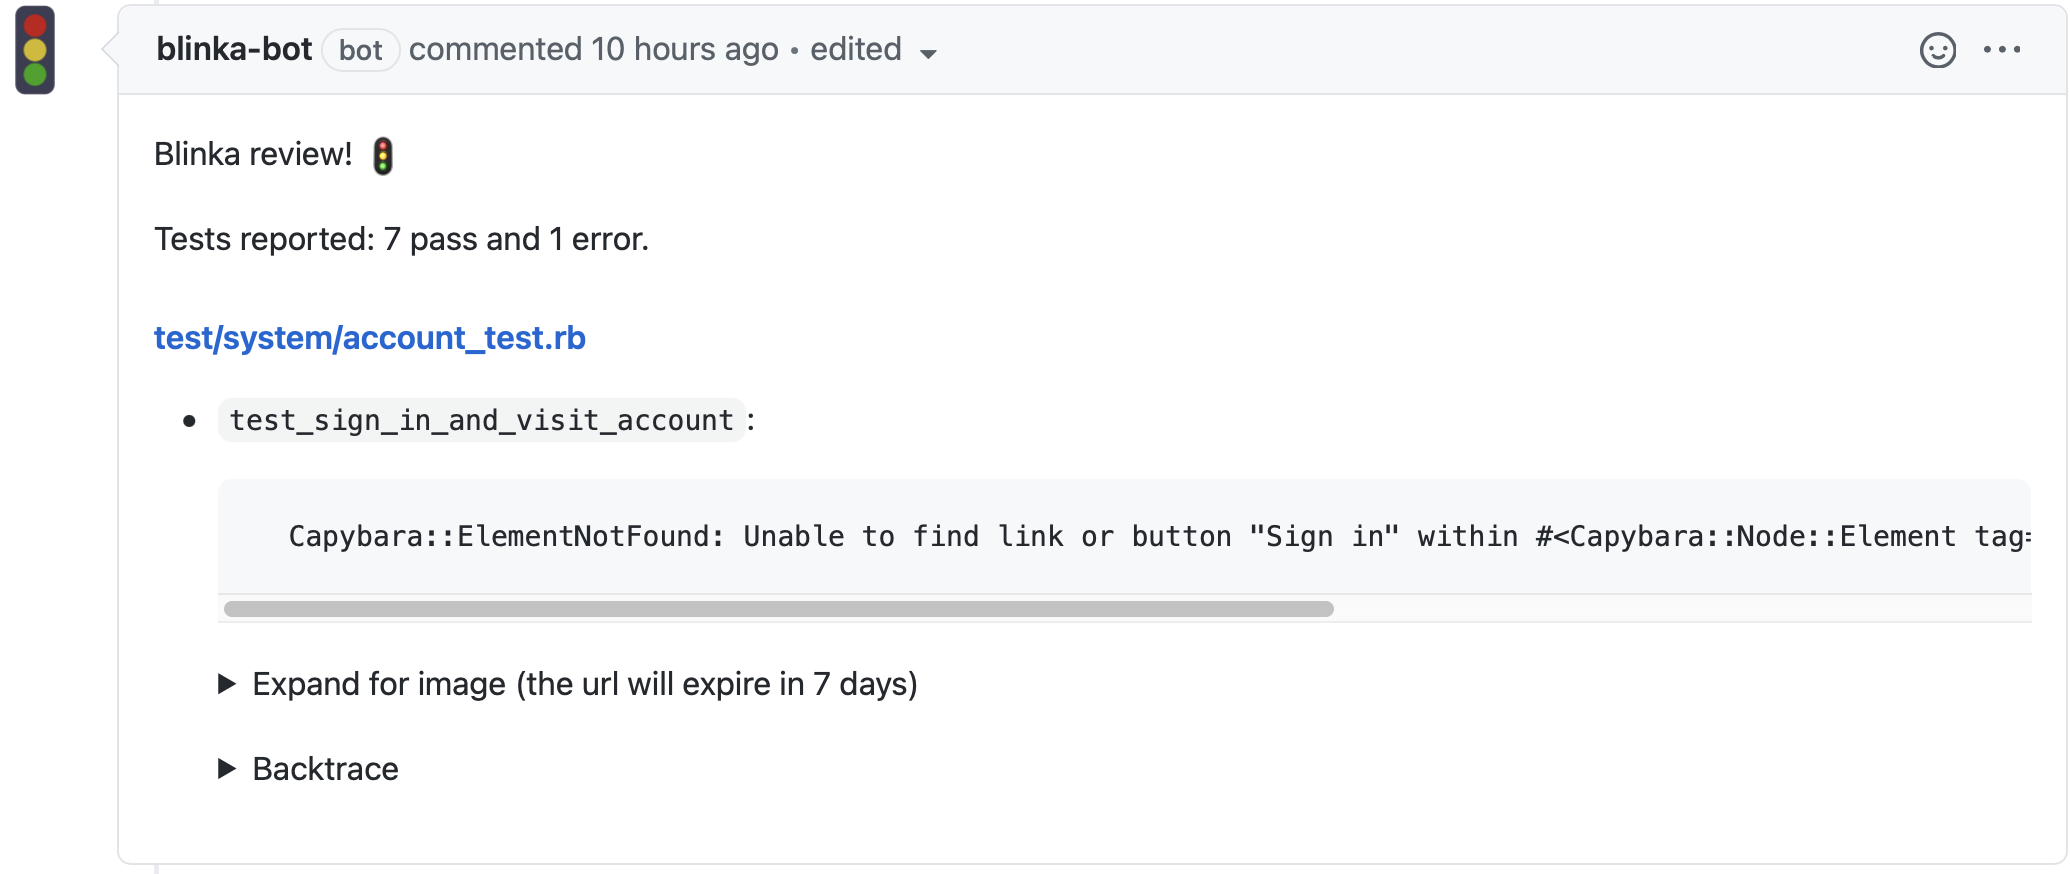 Blinka posts a comment on Github pull request with test results.